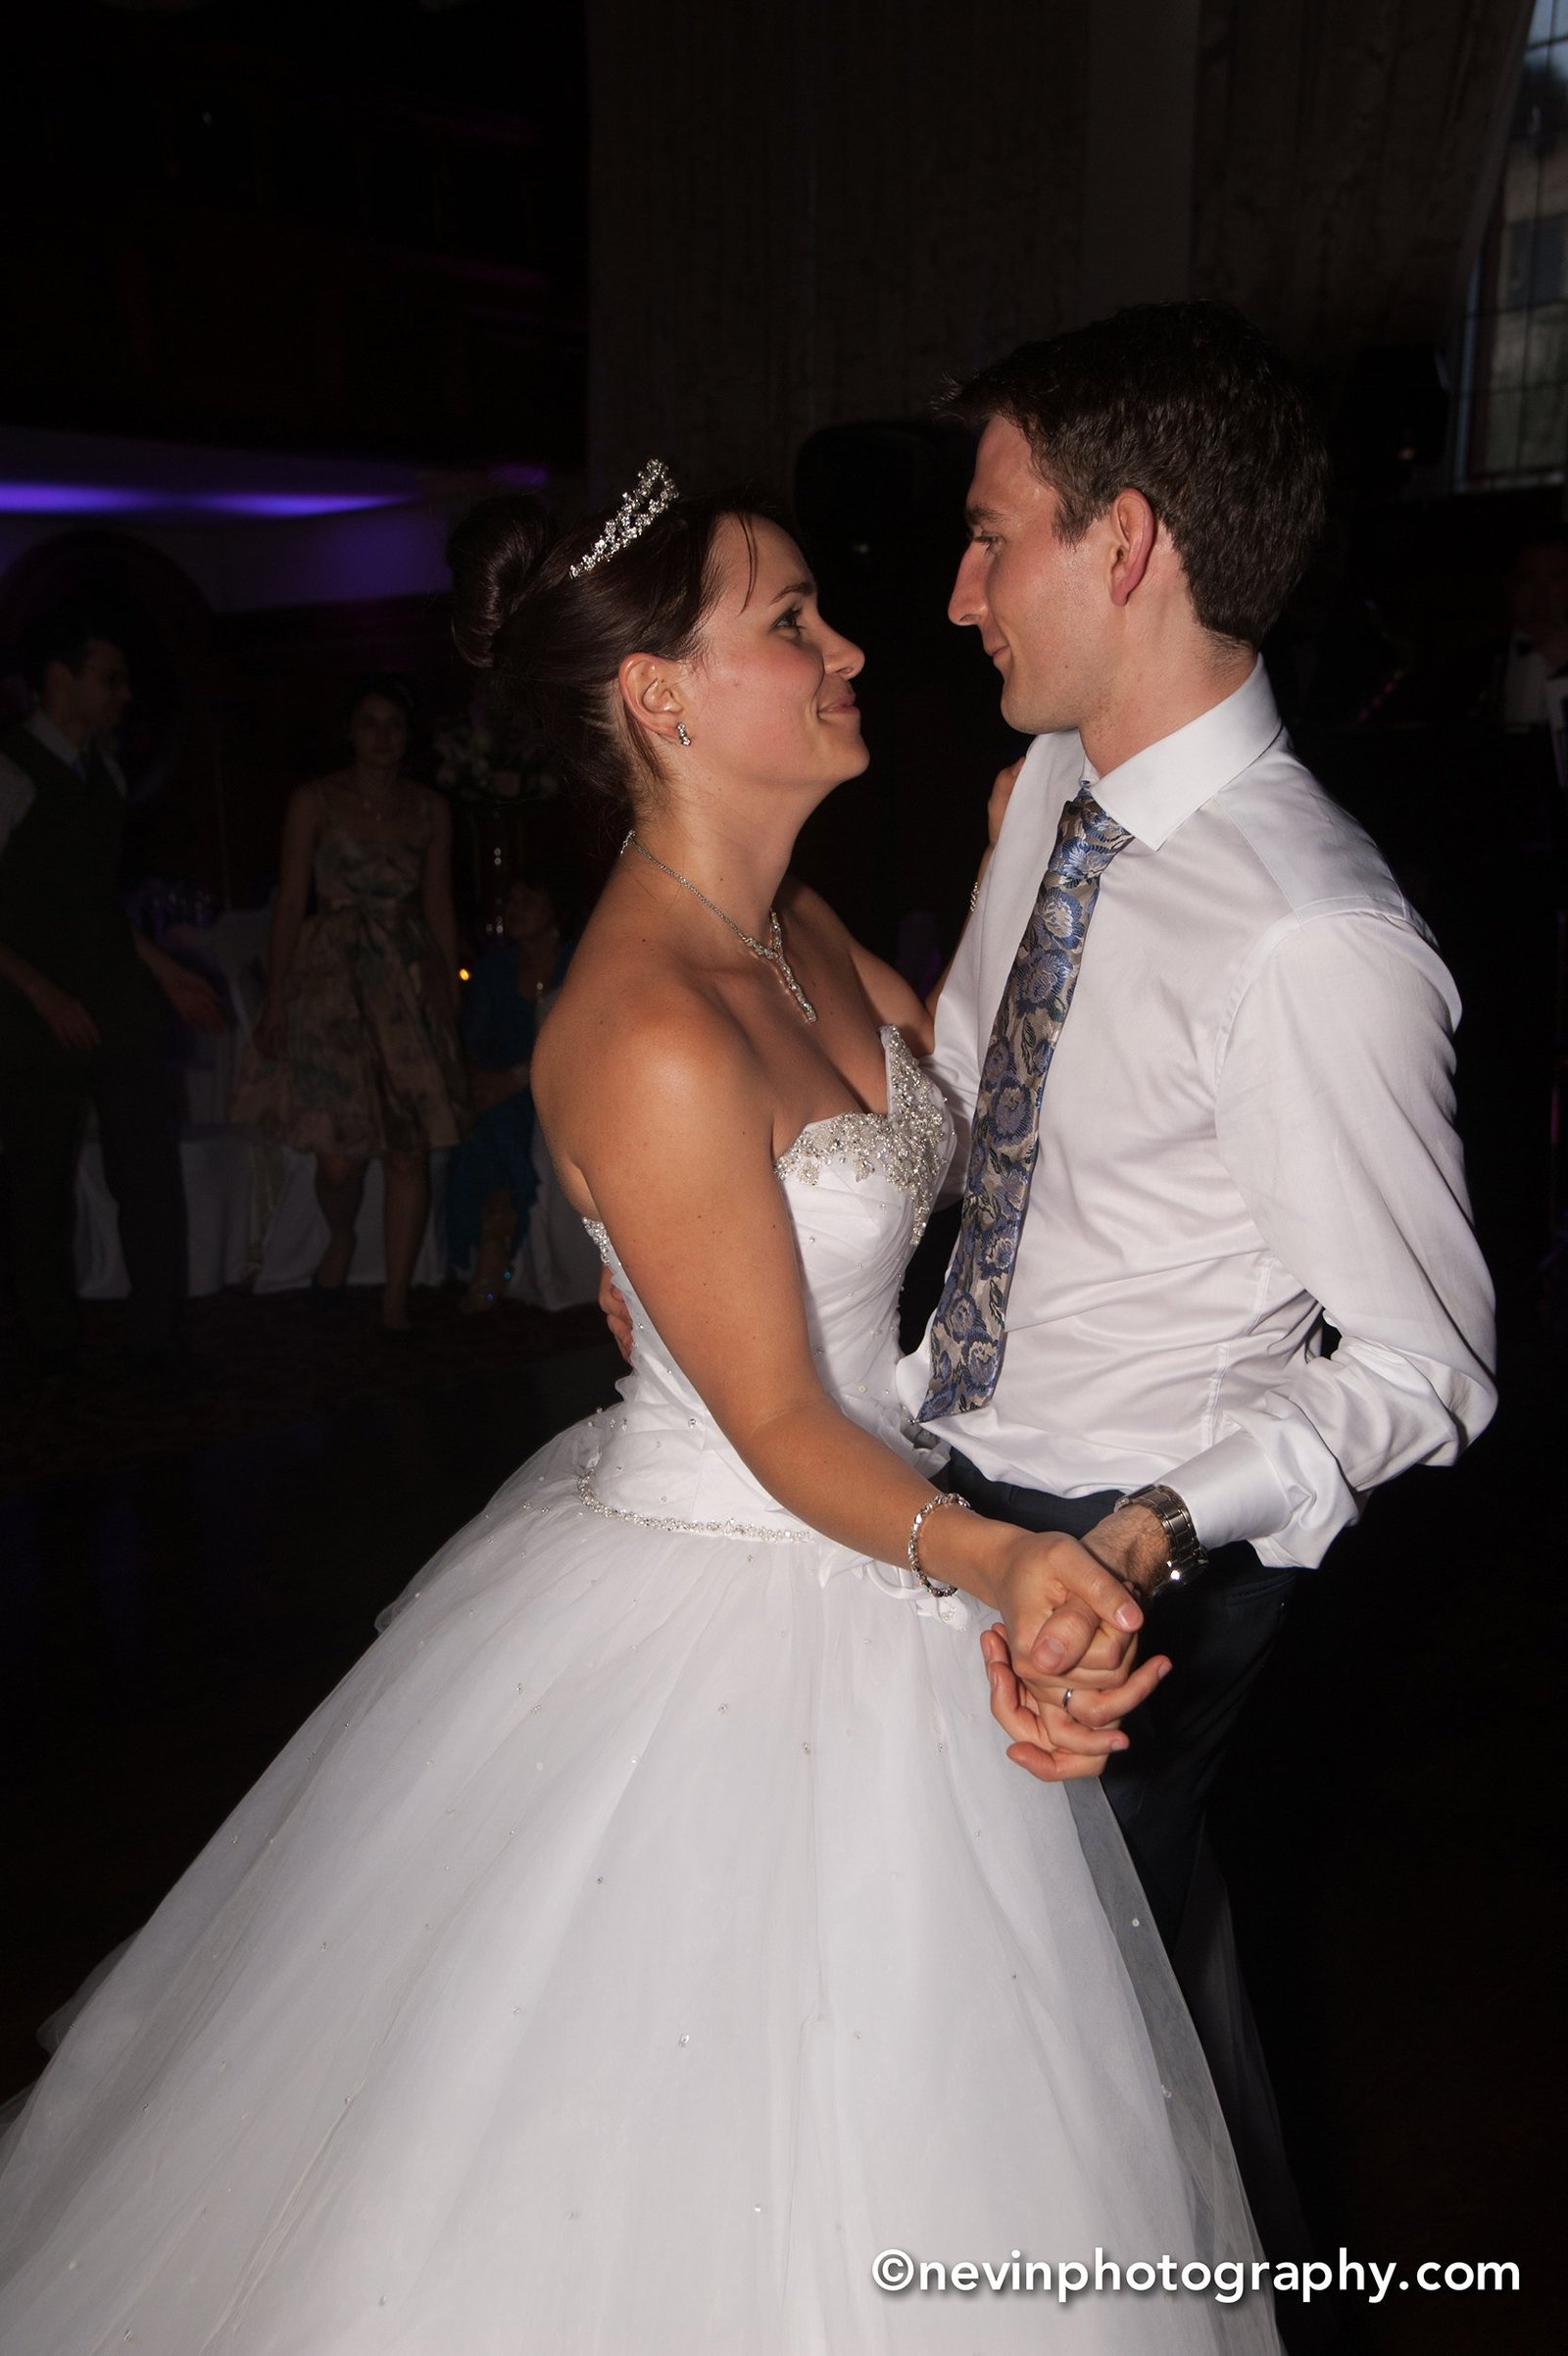 Couples first dance as husband and wife